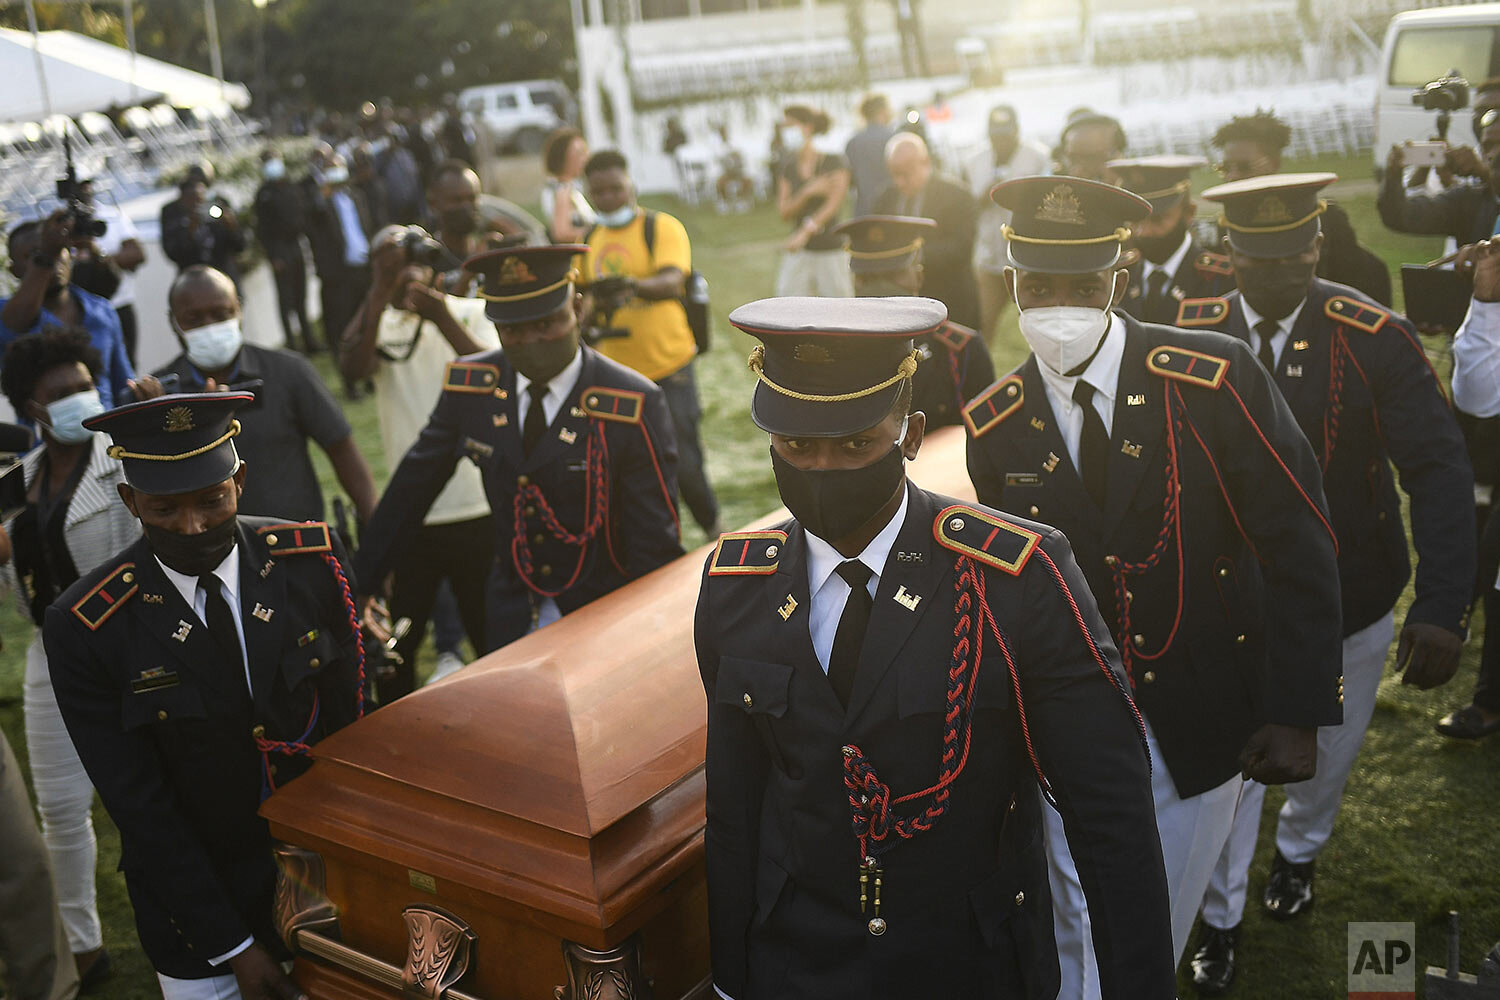  Police carry the coffin of slain Haitian President Jovenel Moise at the start of the funeral at his family home in Cap-Haitien, Haiti, early Friday, July 23, 2021. Moise was assassinated at his home in Port-au-Prince on July 7. (AP Photo/Matias Dela